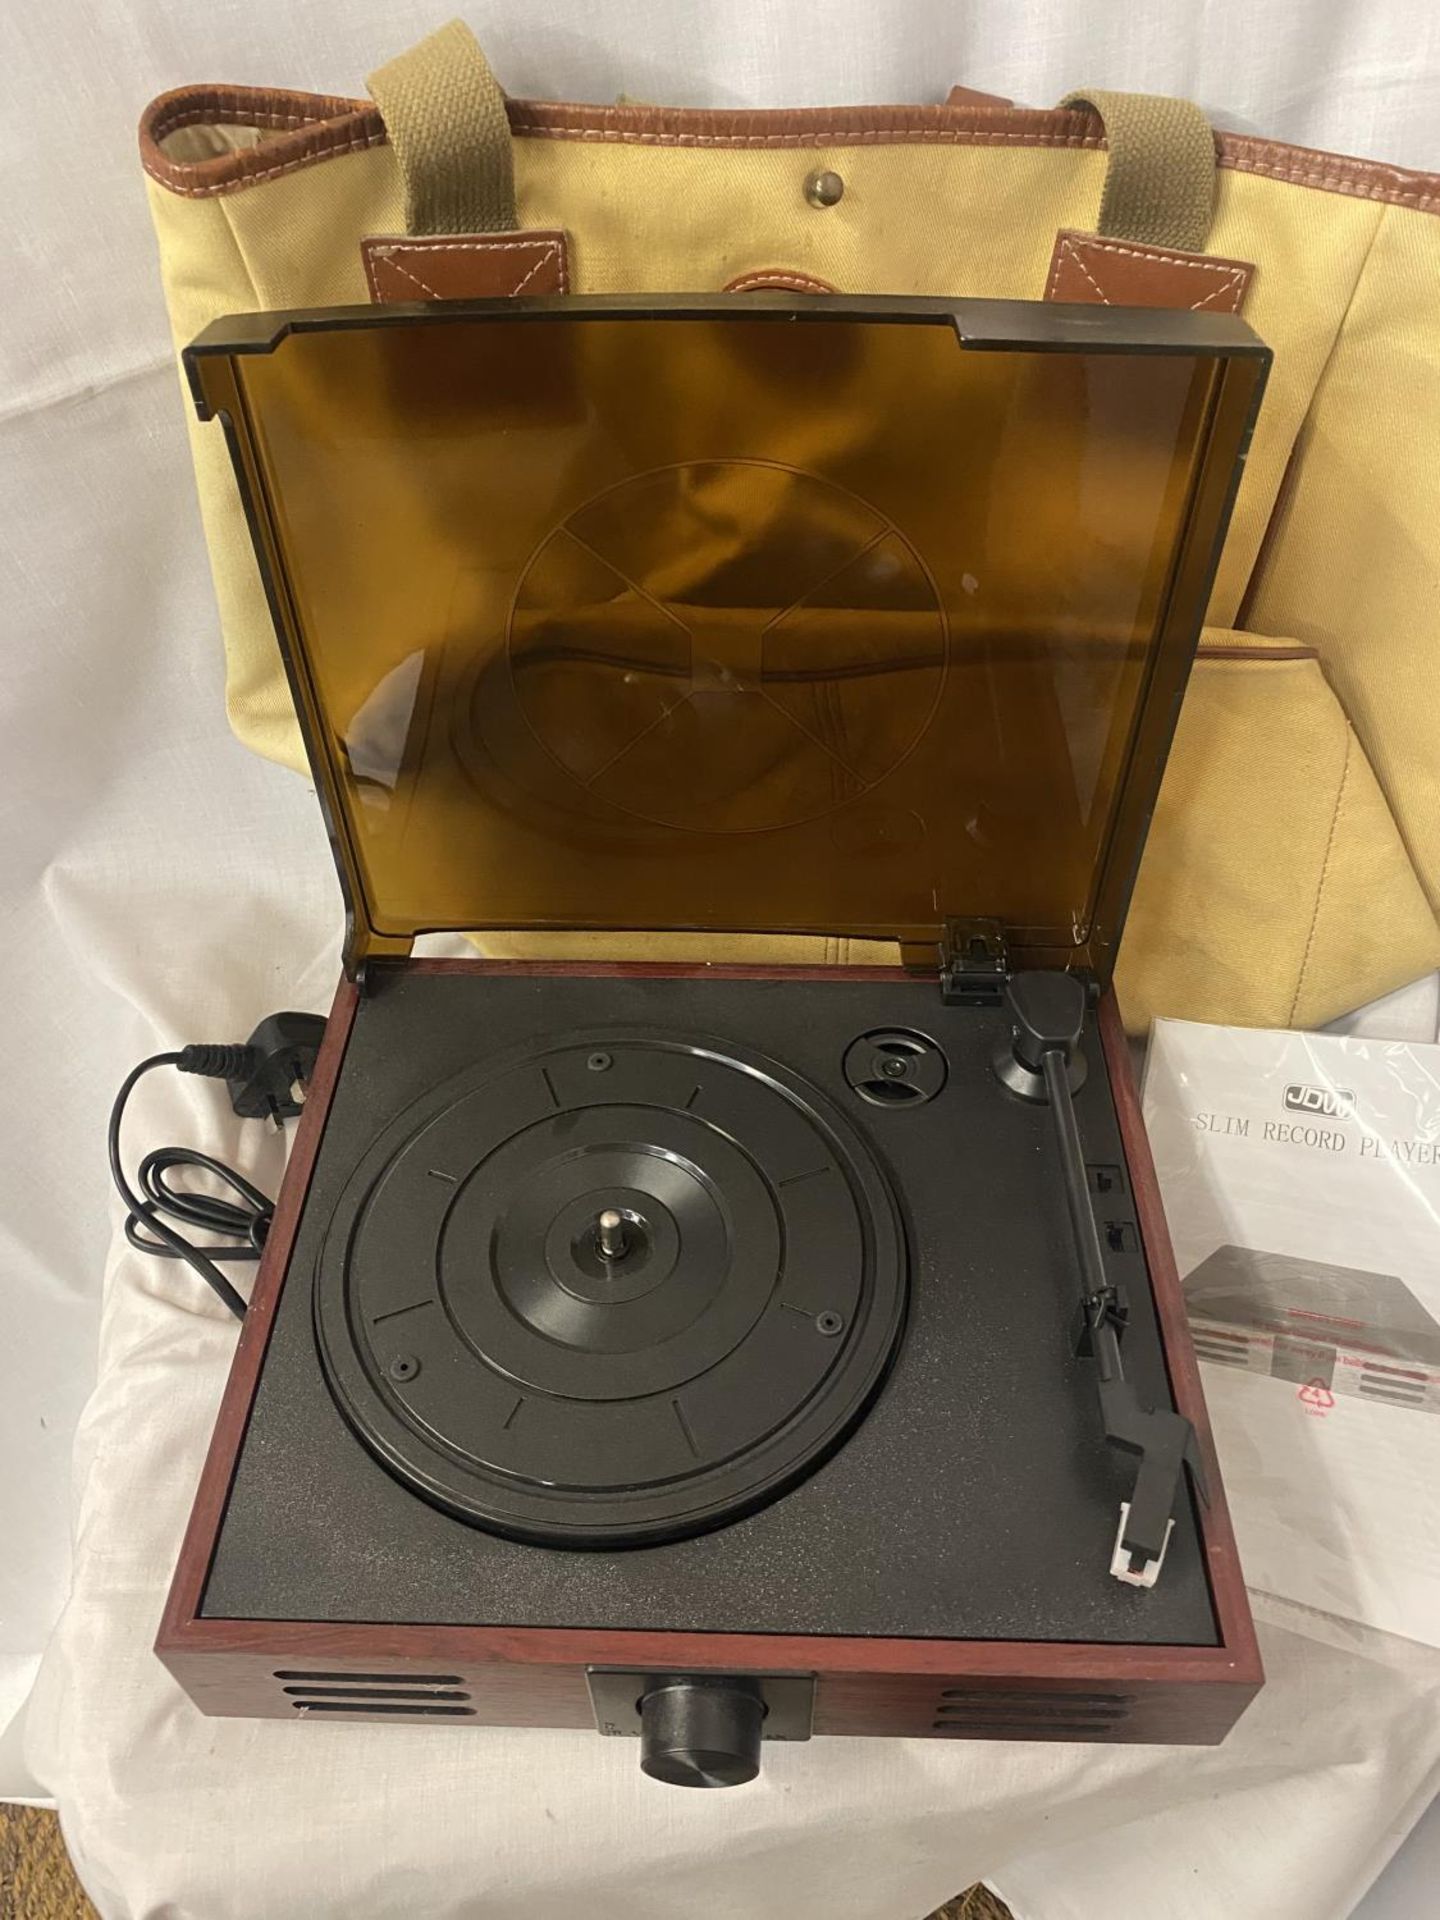 A JDW RECORD PLAYER - Image 4 of 6